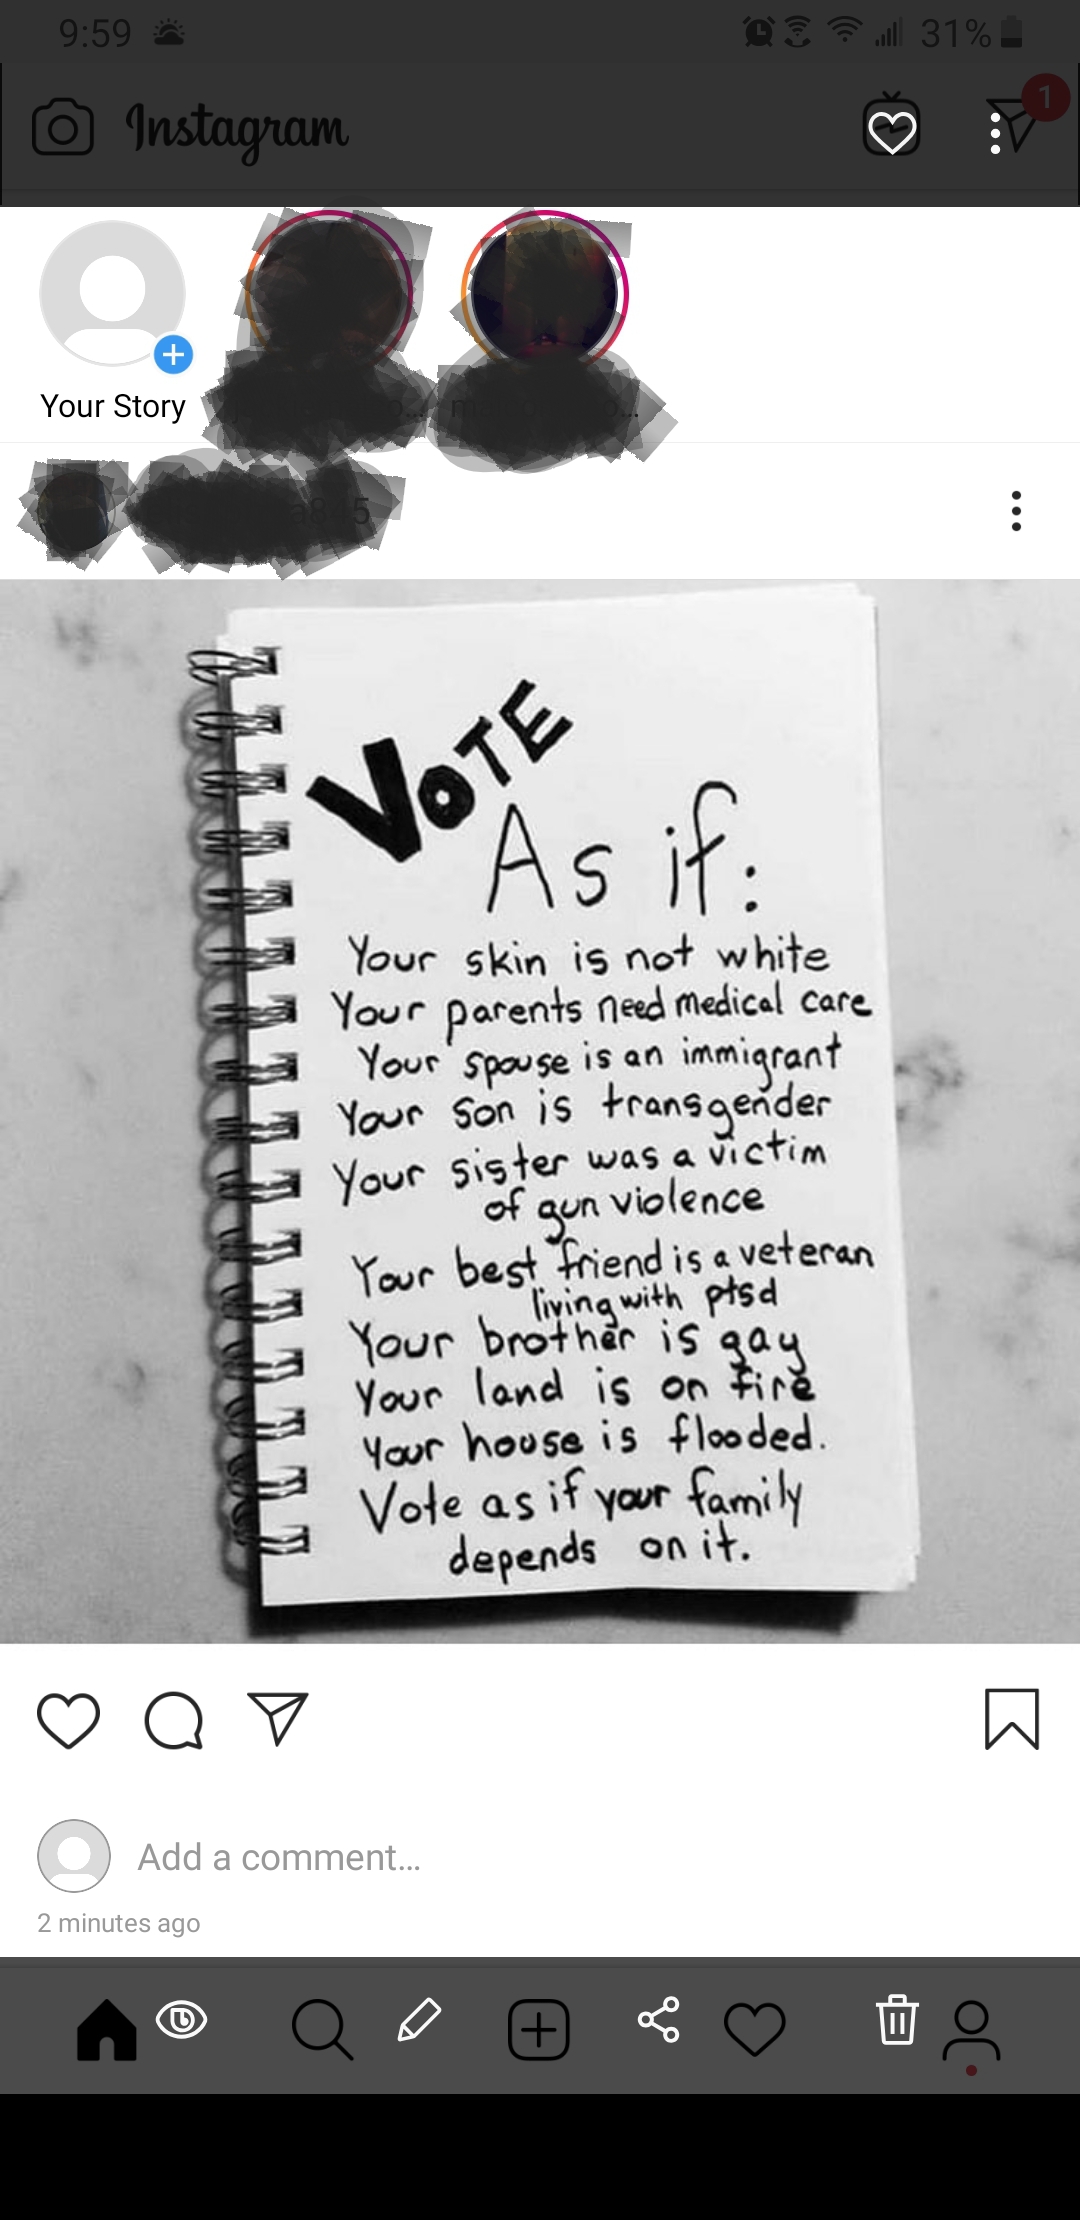 vote like you are not white - Instagram Your Story ht Asit Your skin is not white Your parents ned medical care Your spouse is an immigrant Your Son is transgender Your sister was a victim of qua violence Your best Friend is a veteran lain with psd Your b